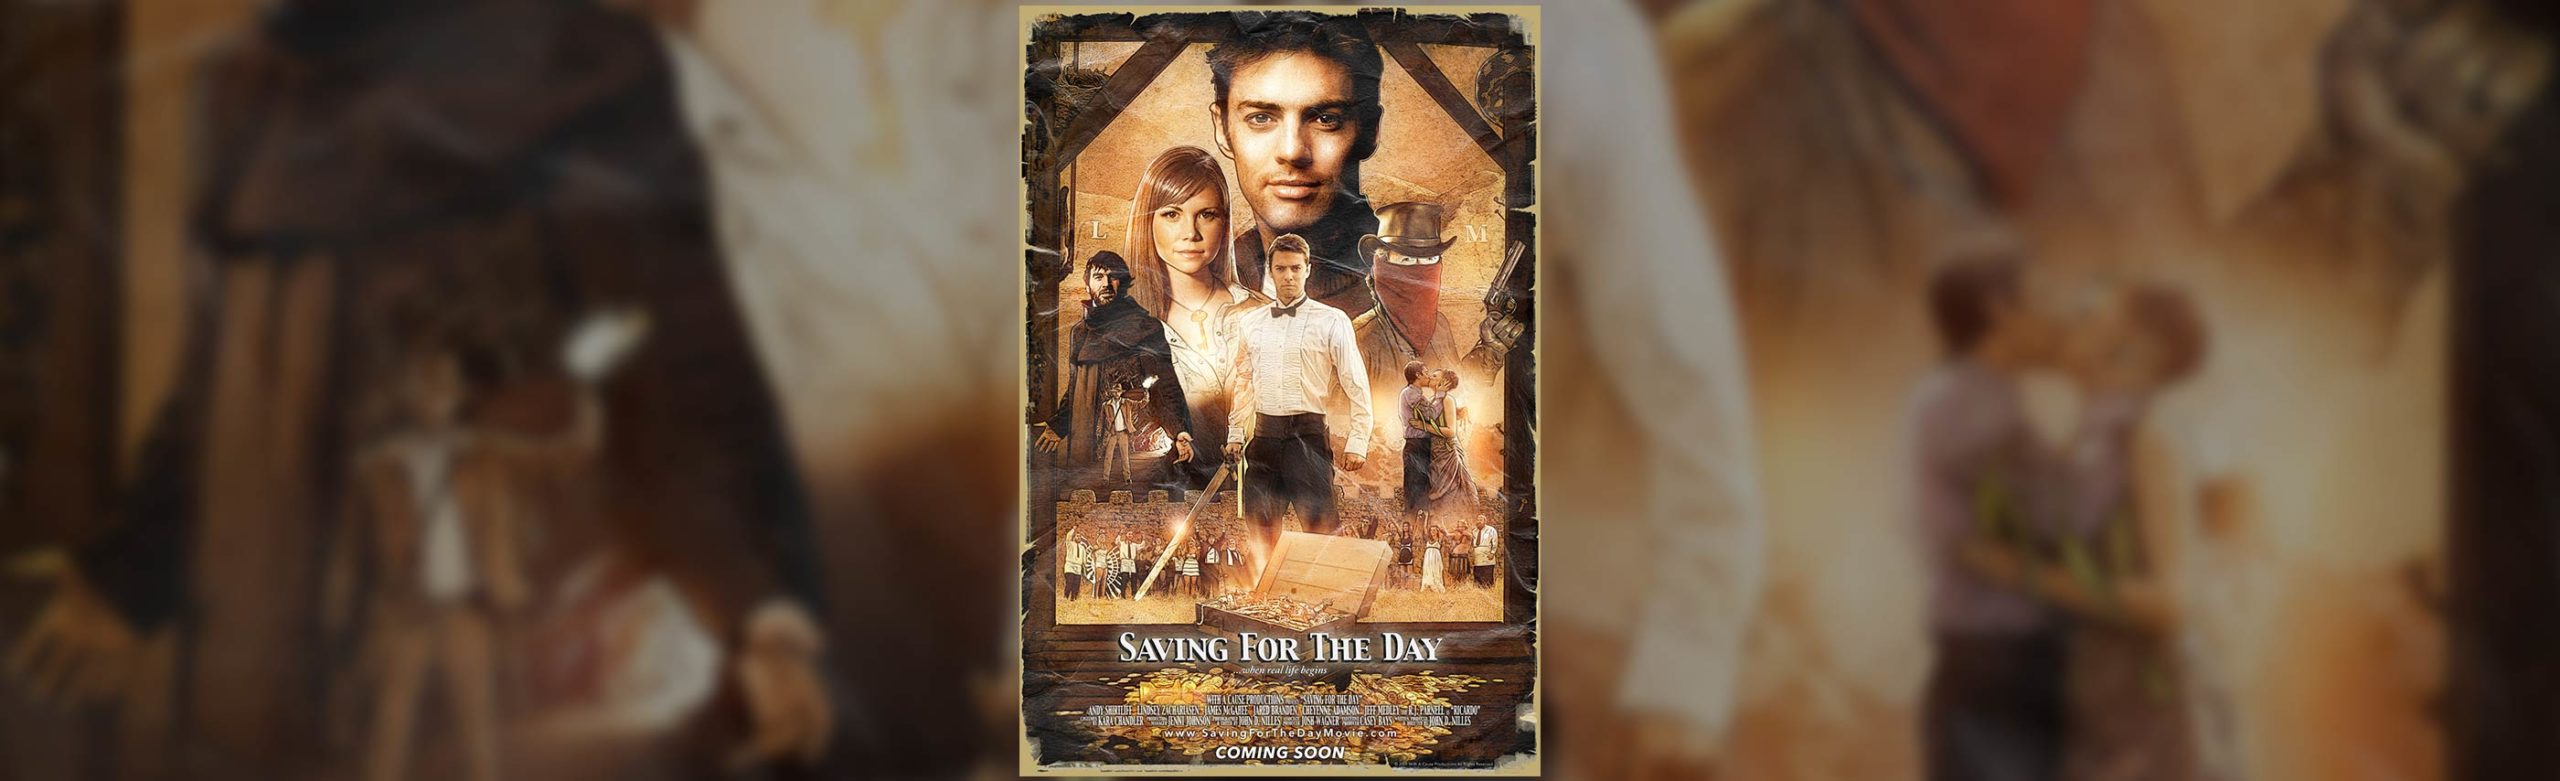 Event Info: “Saving for The Day” World Premiere at The Wilma 2023 Image